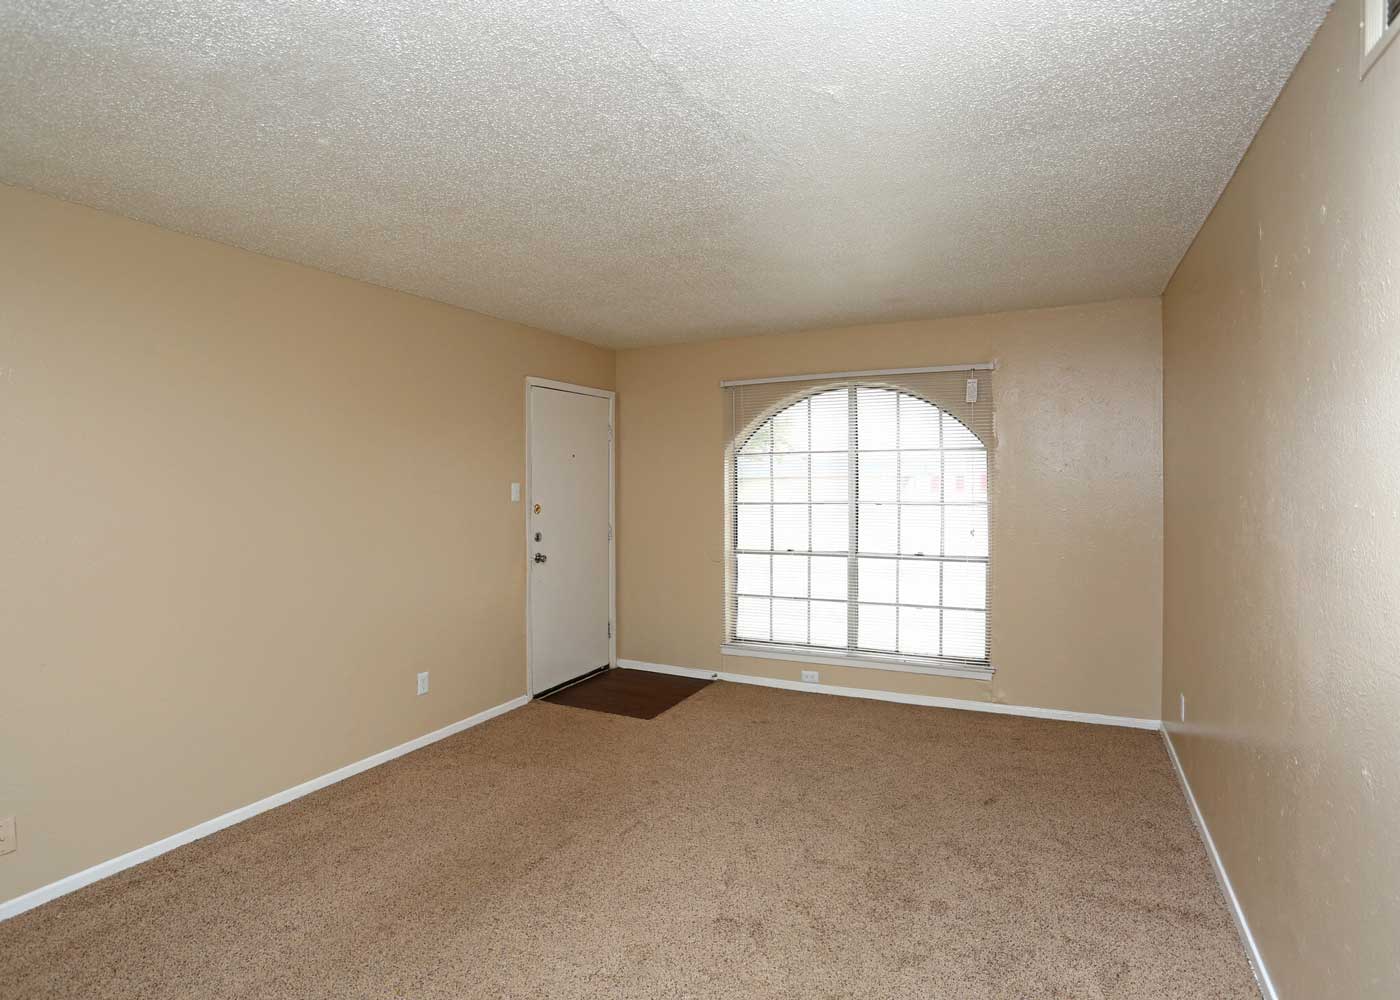 Carpeted Flooring Apartments at The Junction Apartments in Arlington, Texas